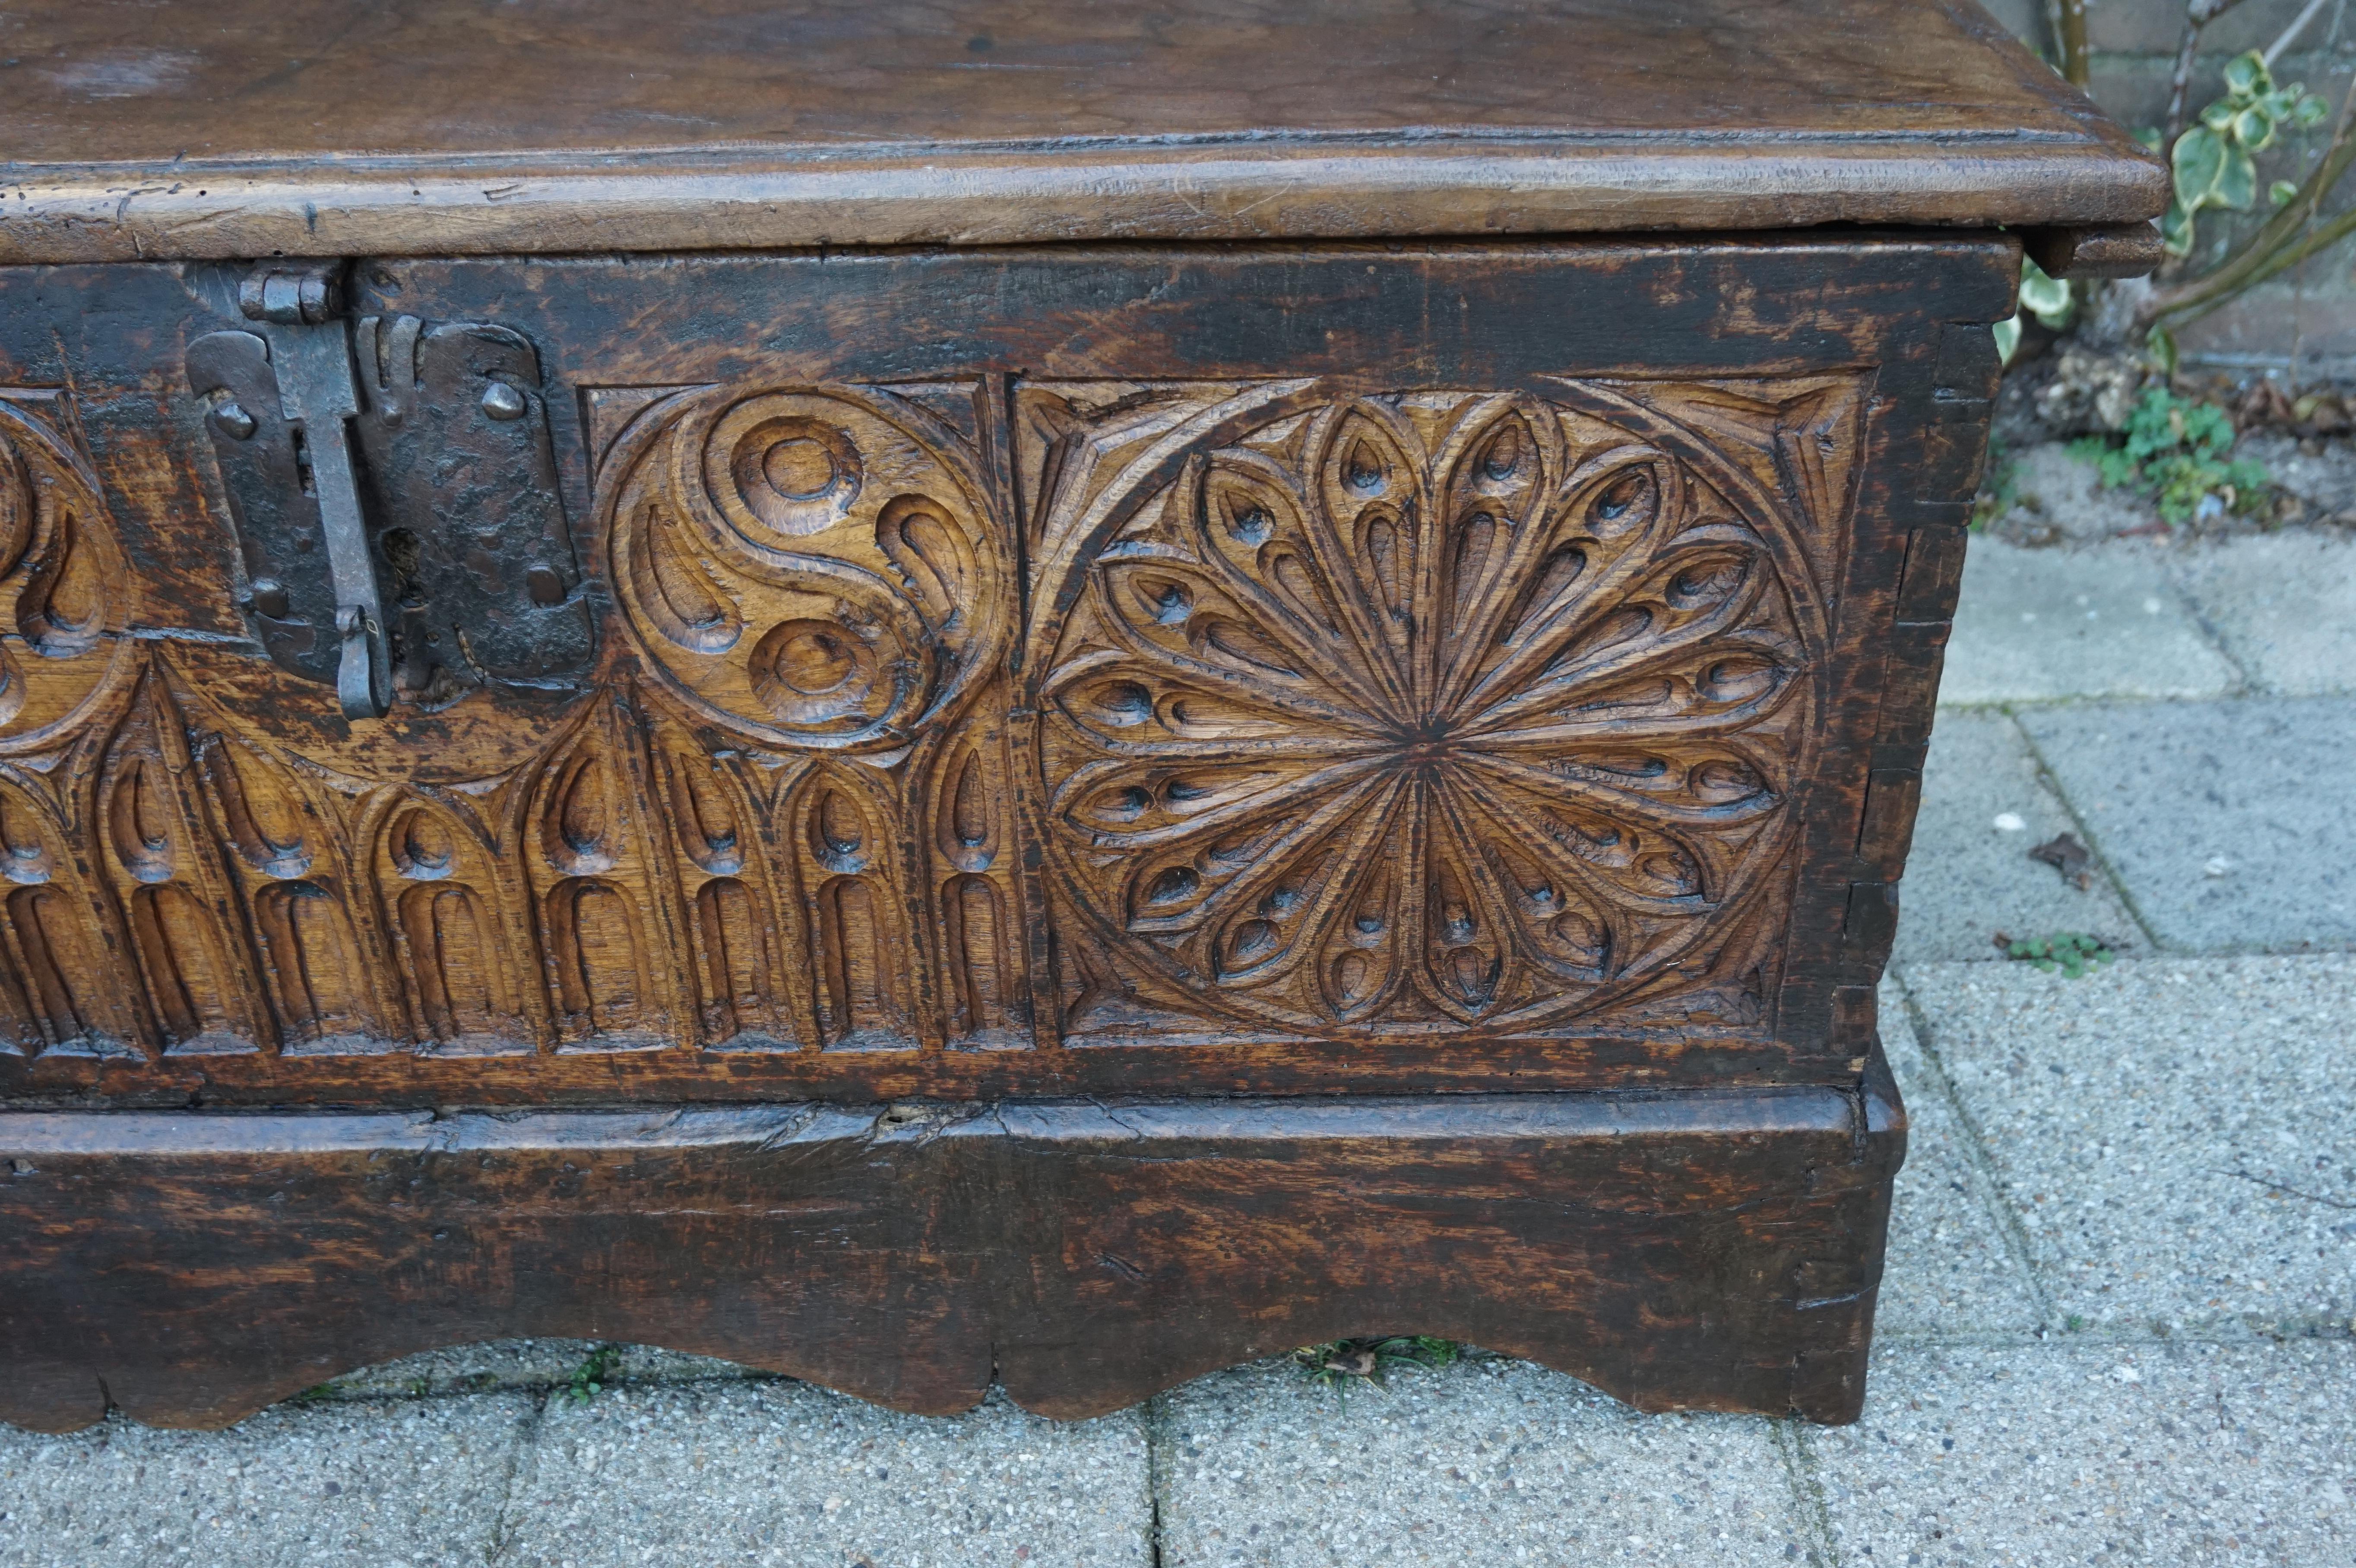 Forged Antique Gothic Revival Blanket Chest / Trunk with an Amazing Patina 1680 - 1720